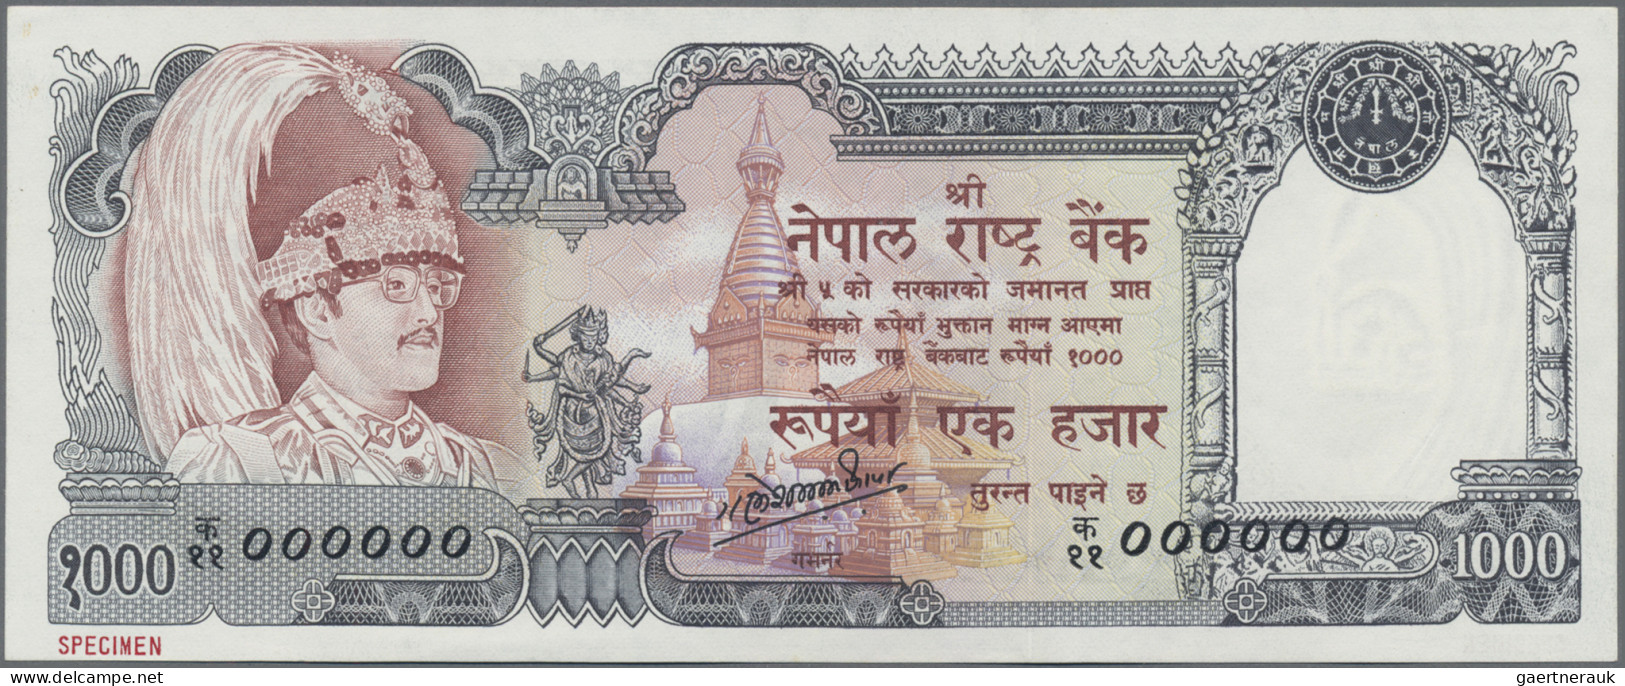 Nepal: Nepal Rastra Bank, 1.000 Rupees ND(1985) SPECIMEN, P.36as With Signature: - Nepal